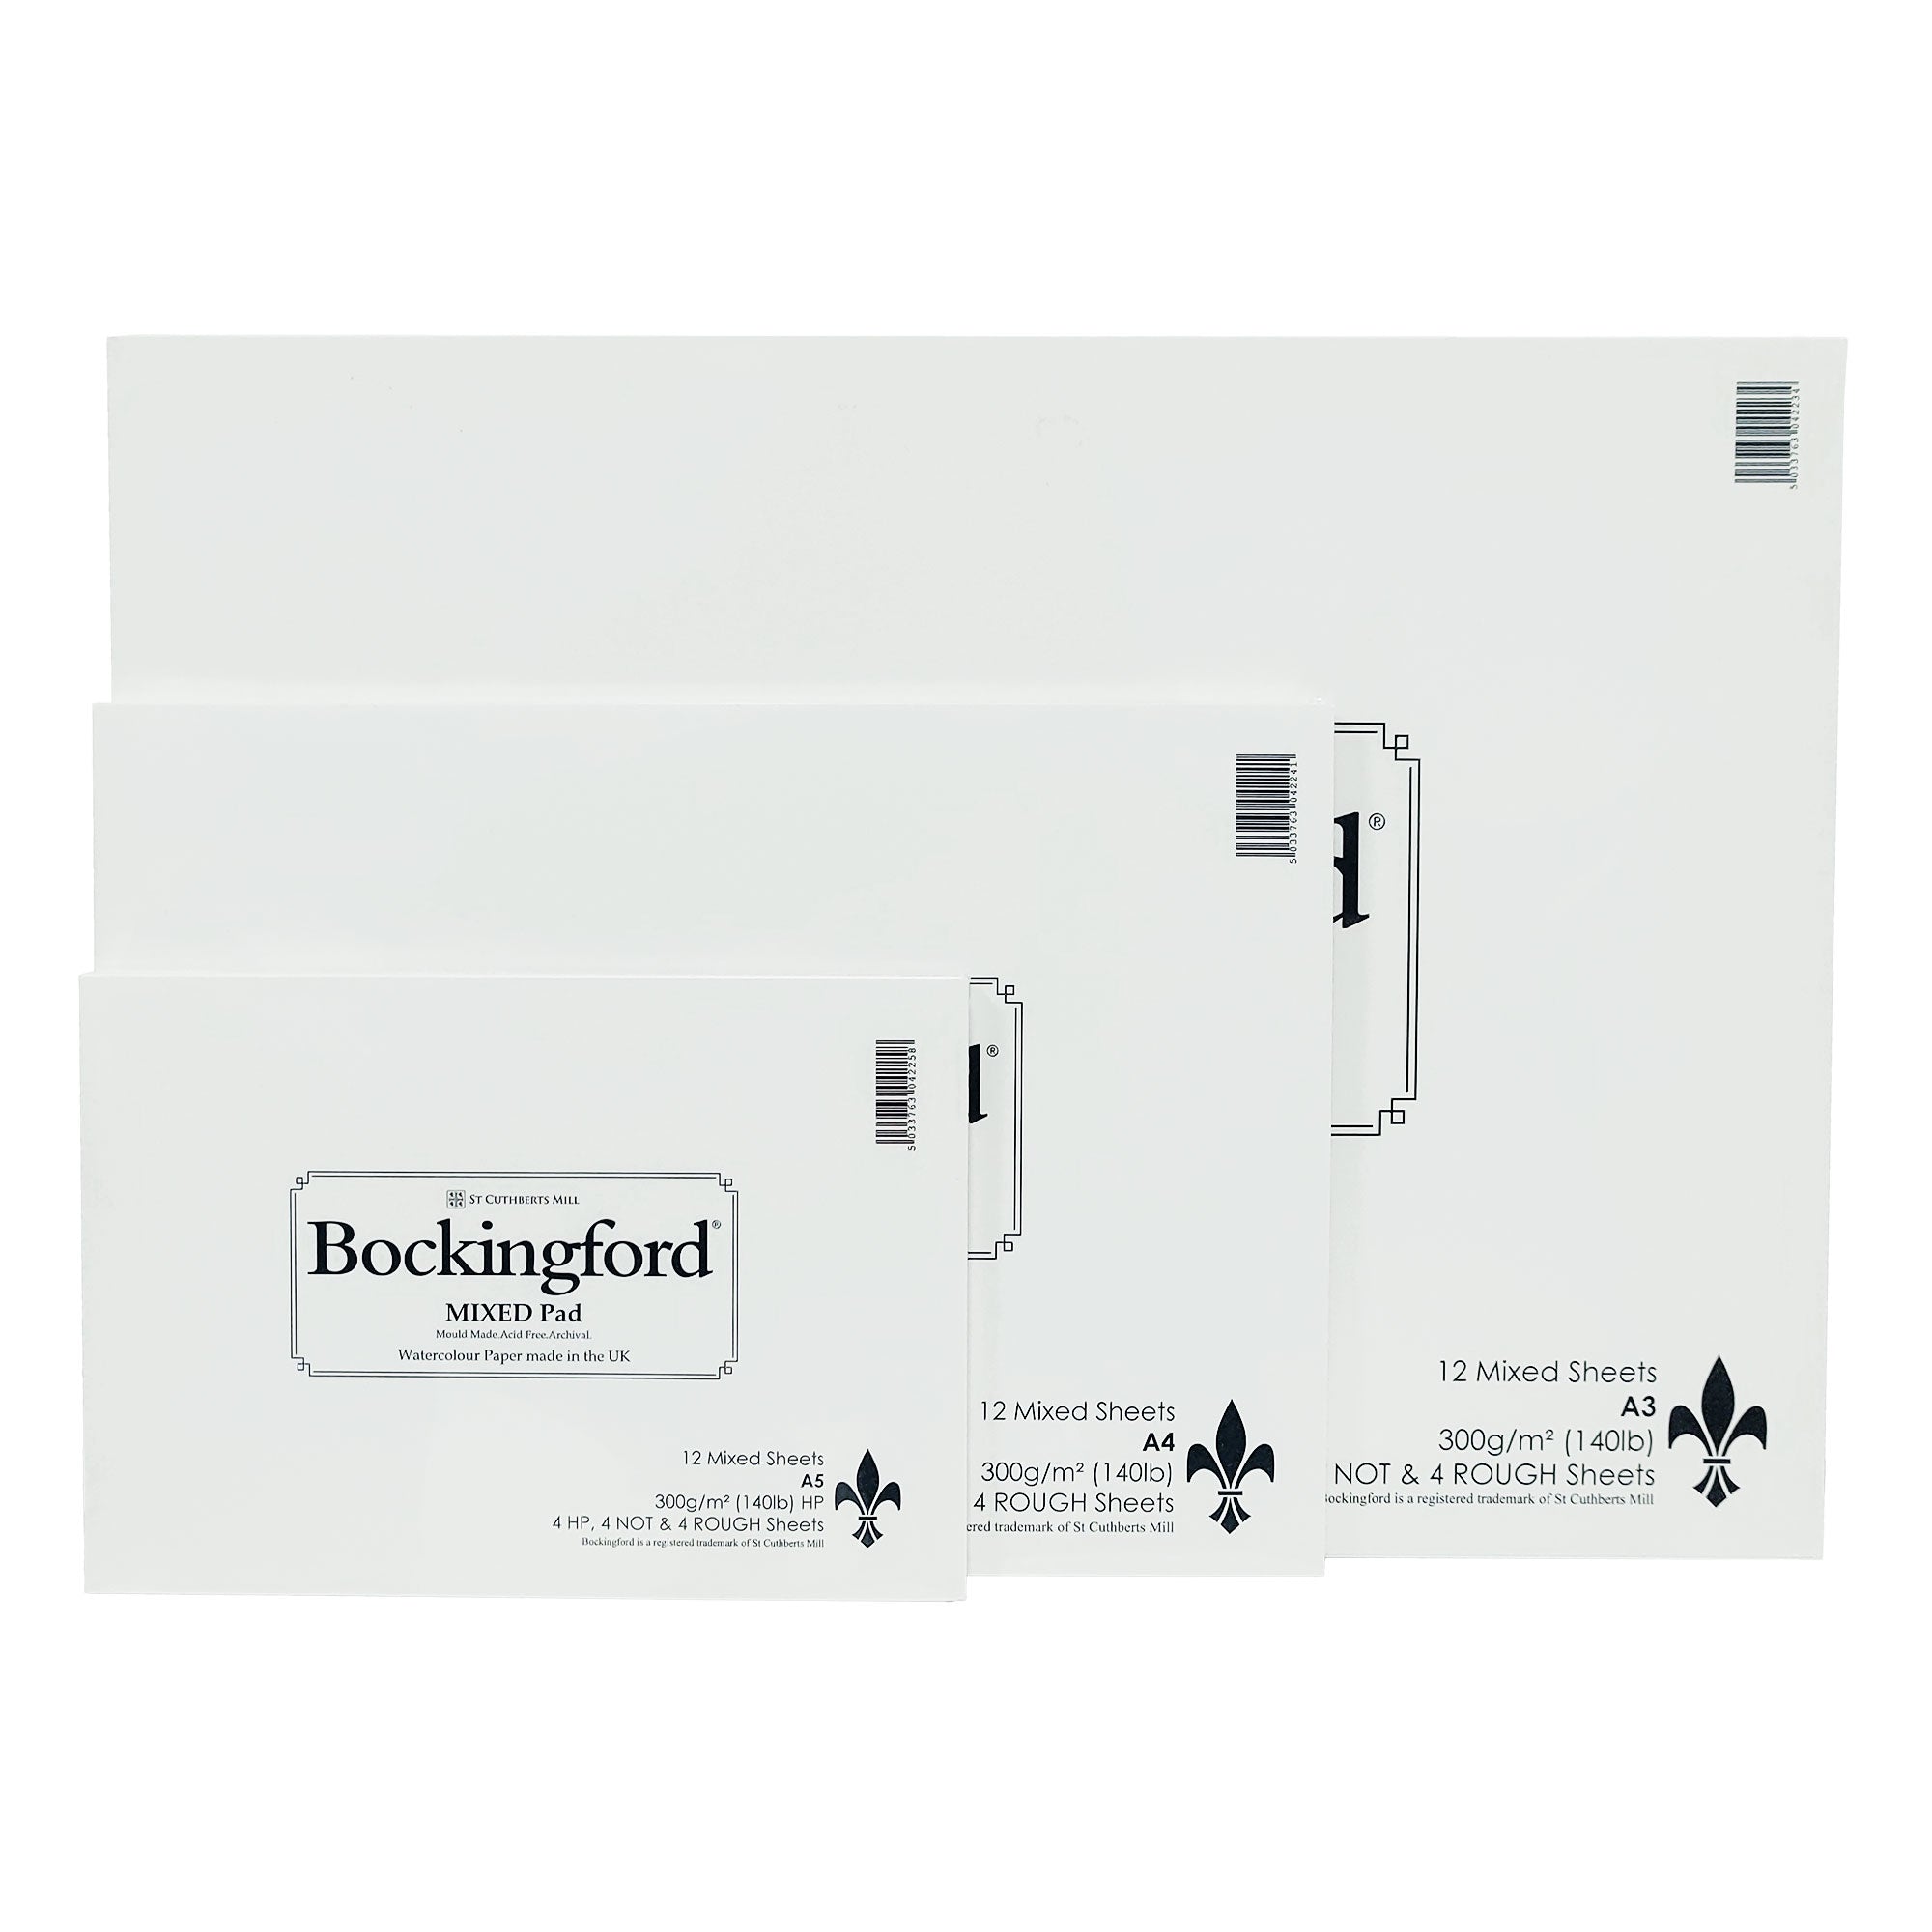 Bockingford Mixed Glued Pads in sizes A5, A4, and A3 